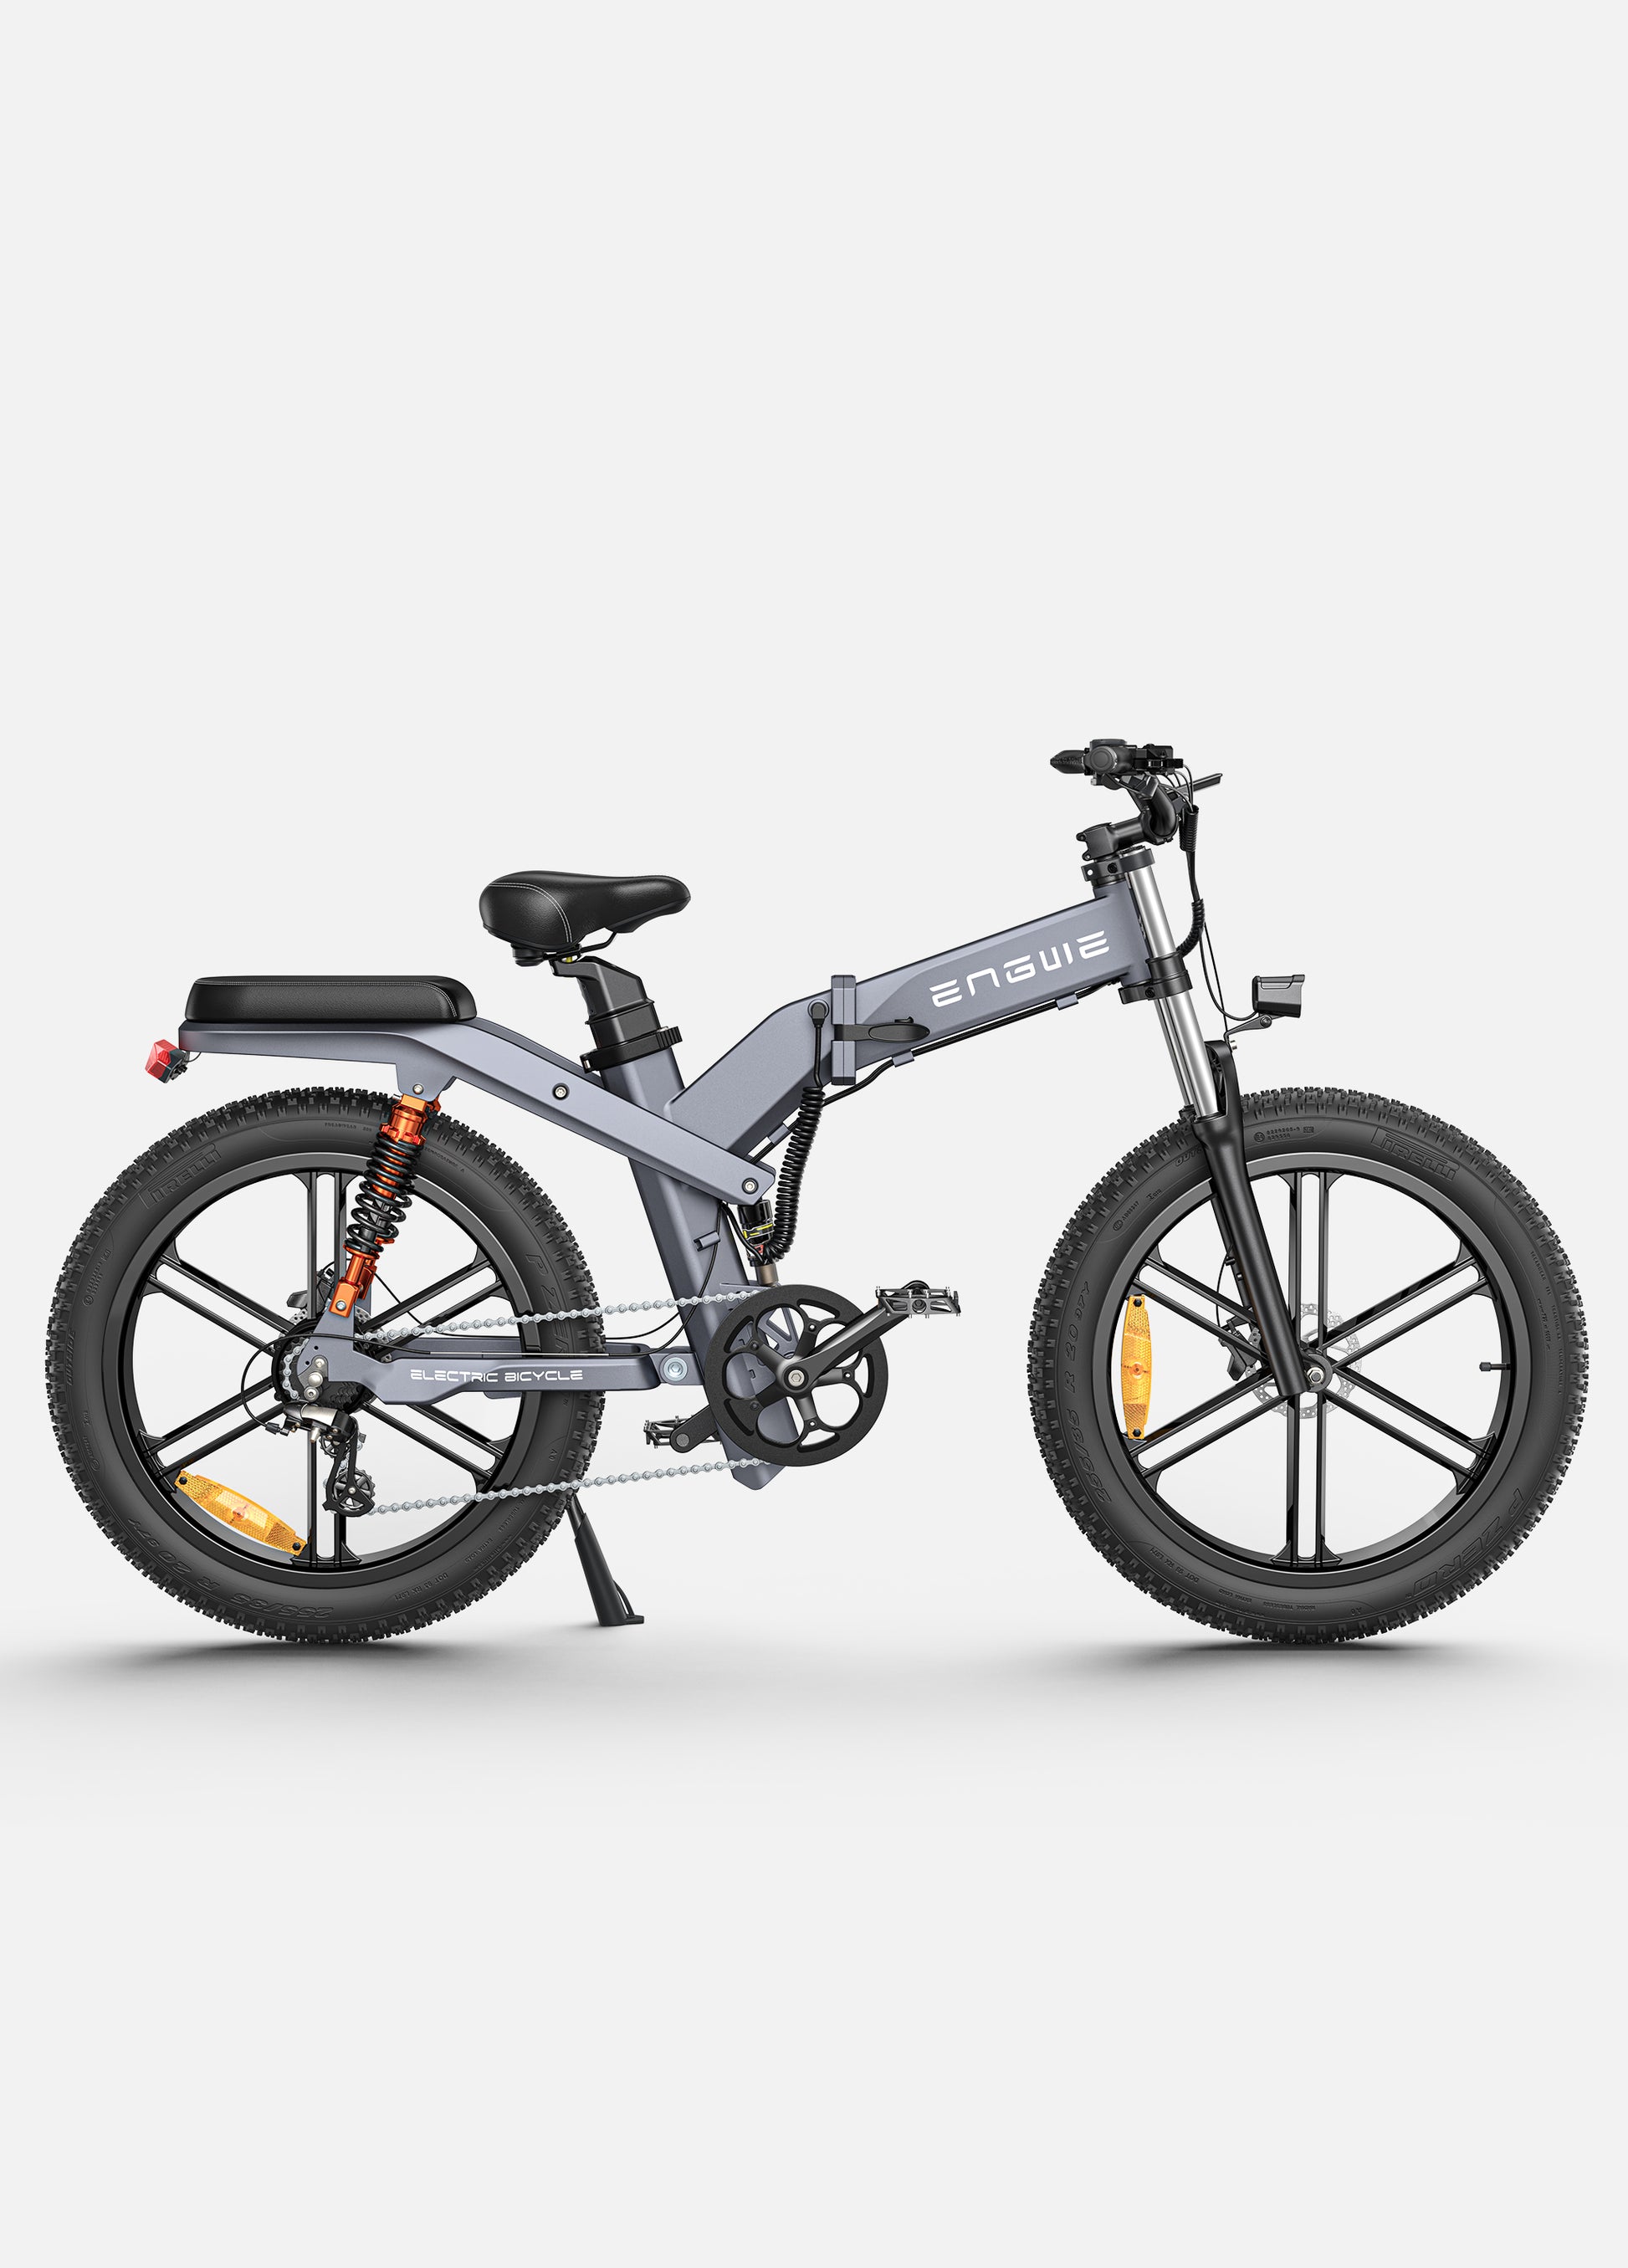 Side view of Engwe X26 electric bike showcasing full suspension and robust frame for off-road adventures.